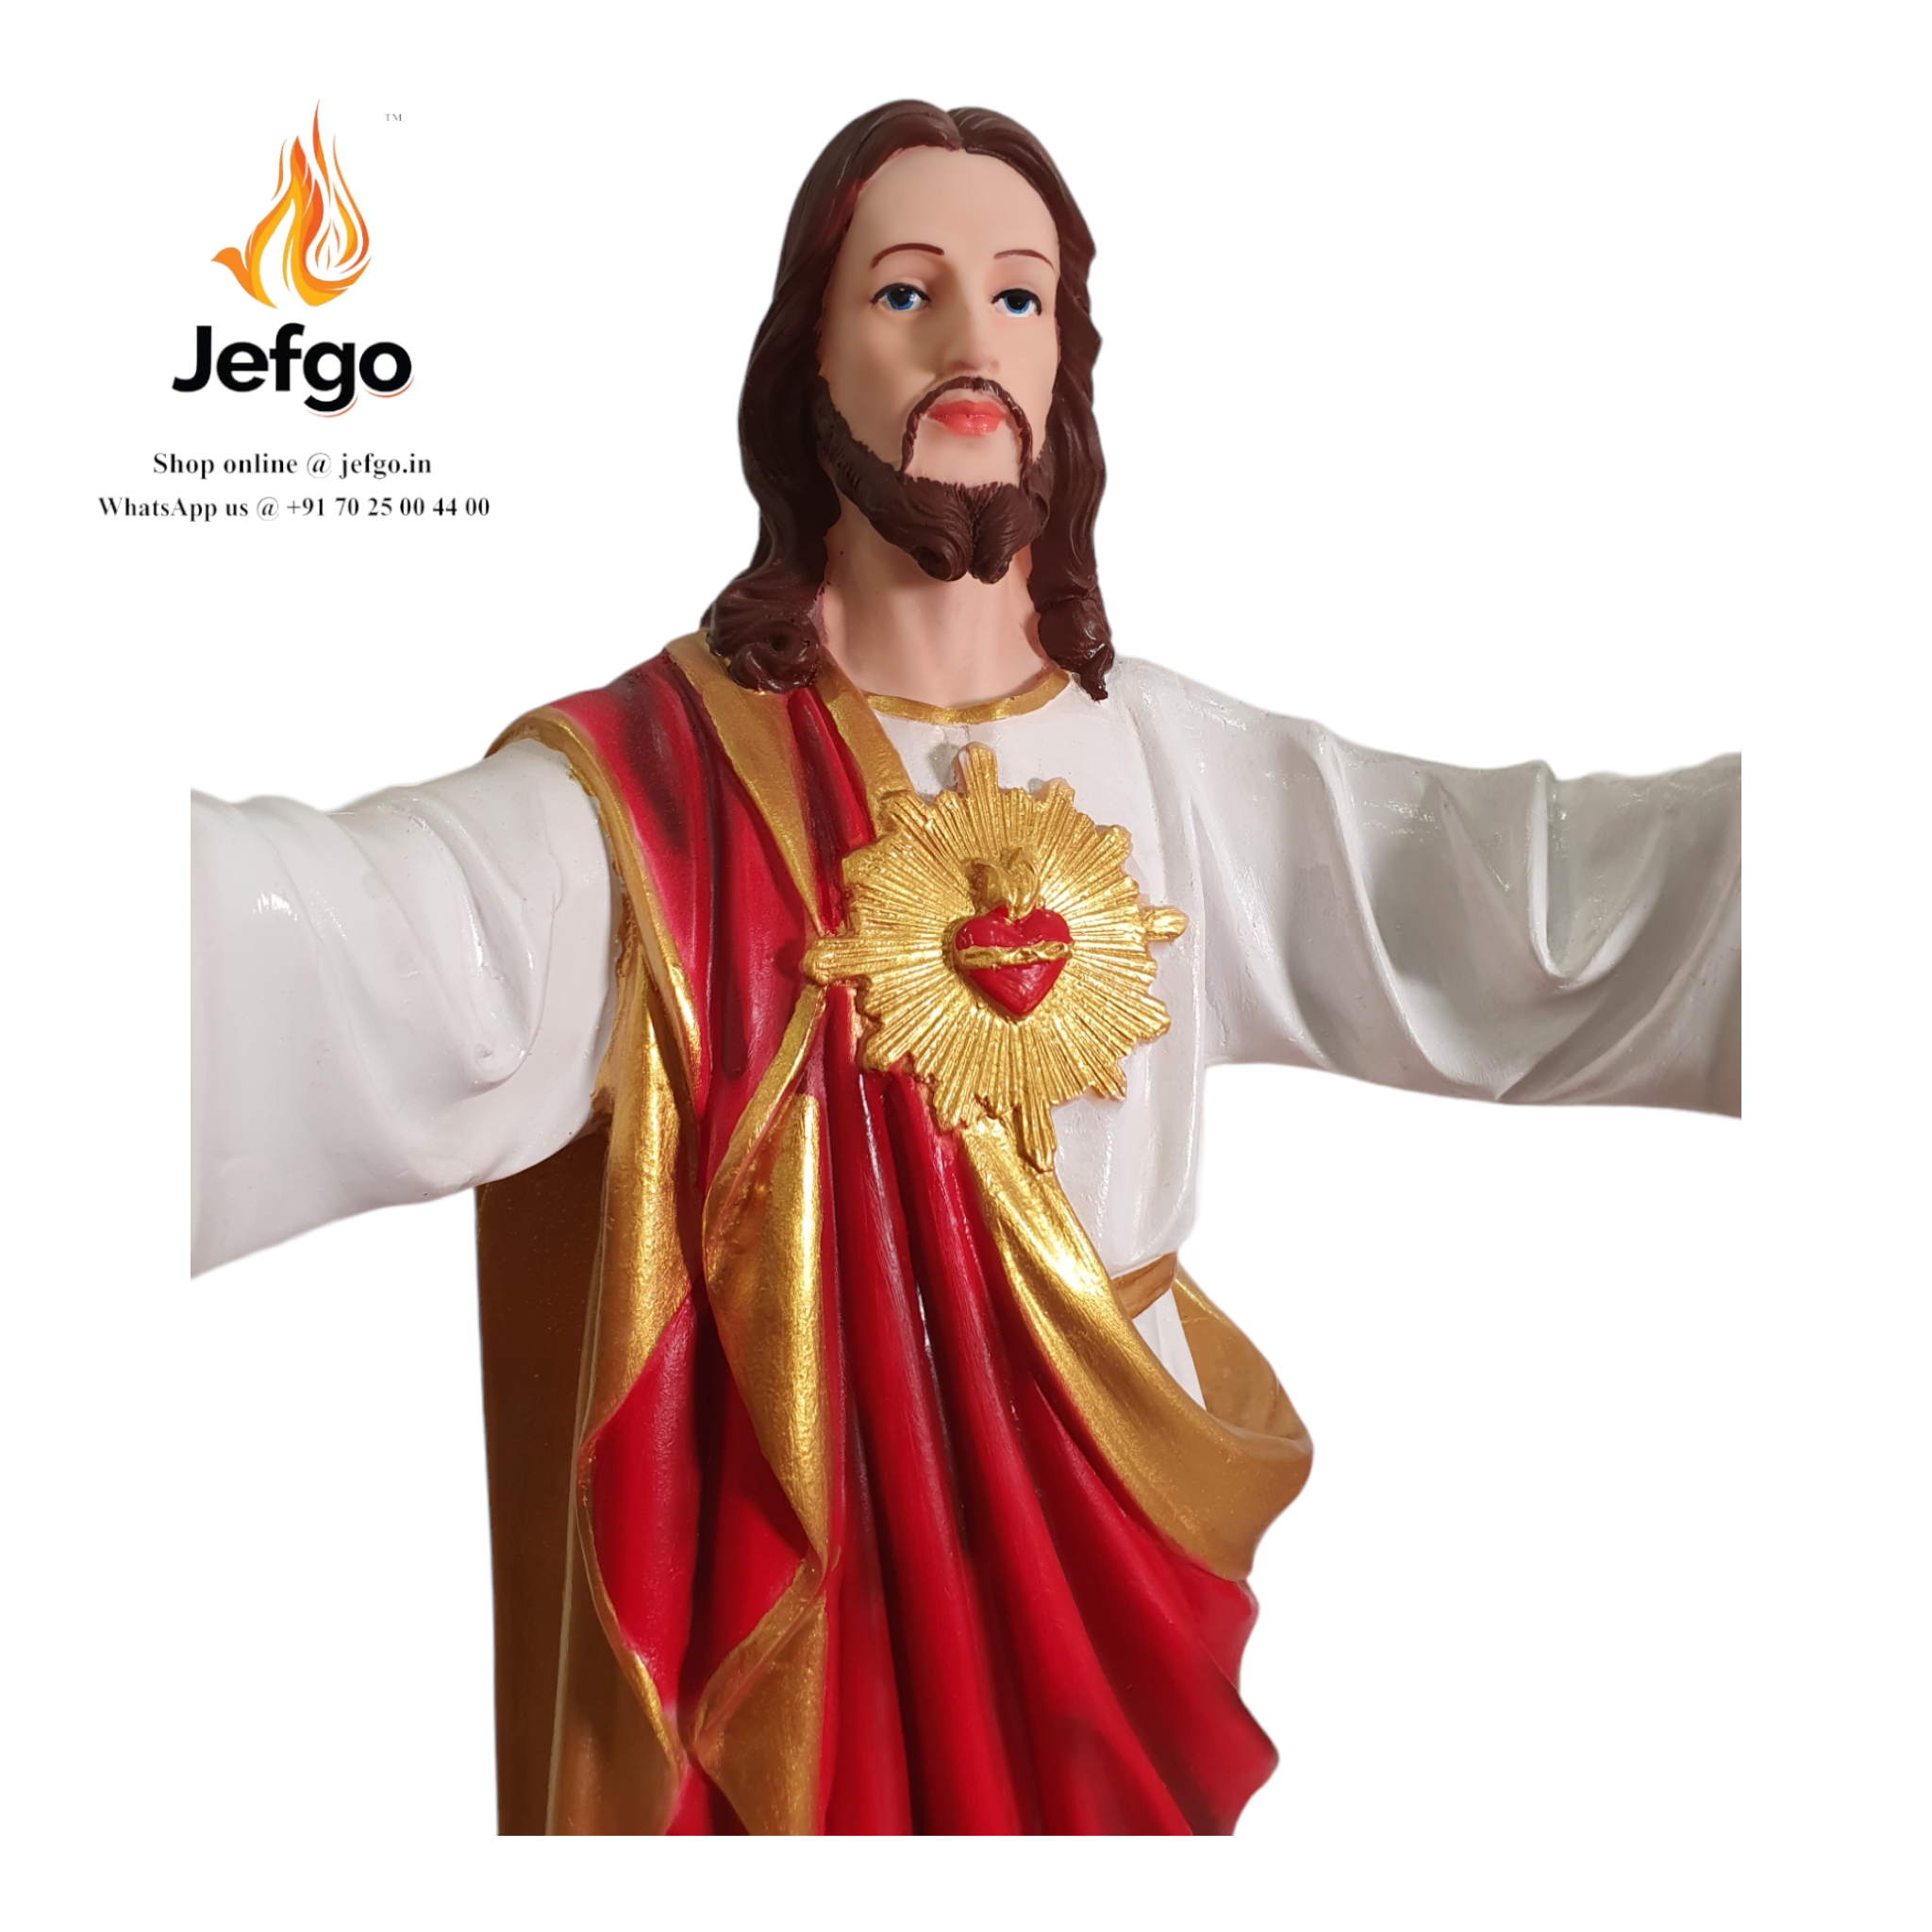 Buy Jesus Statue Blessing hand Position